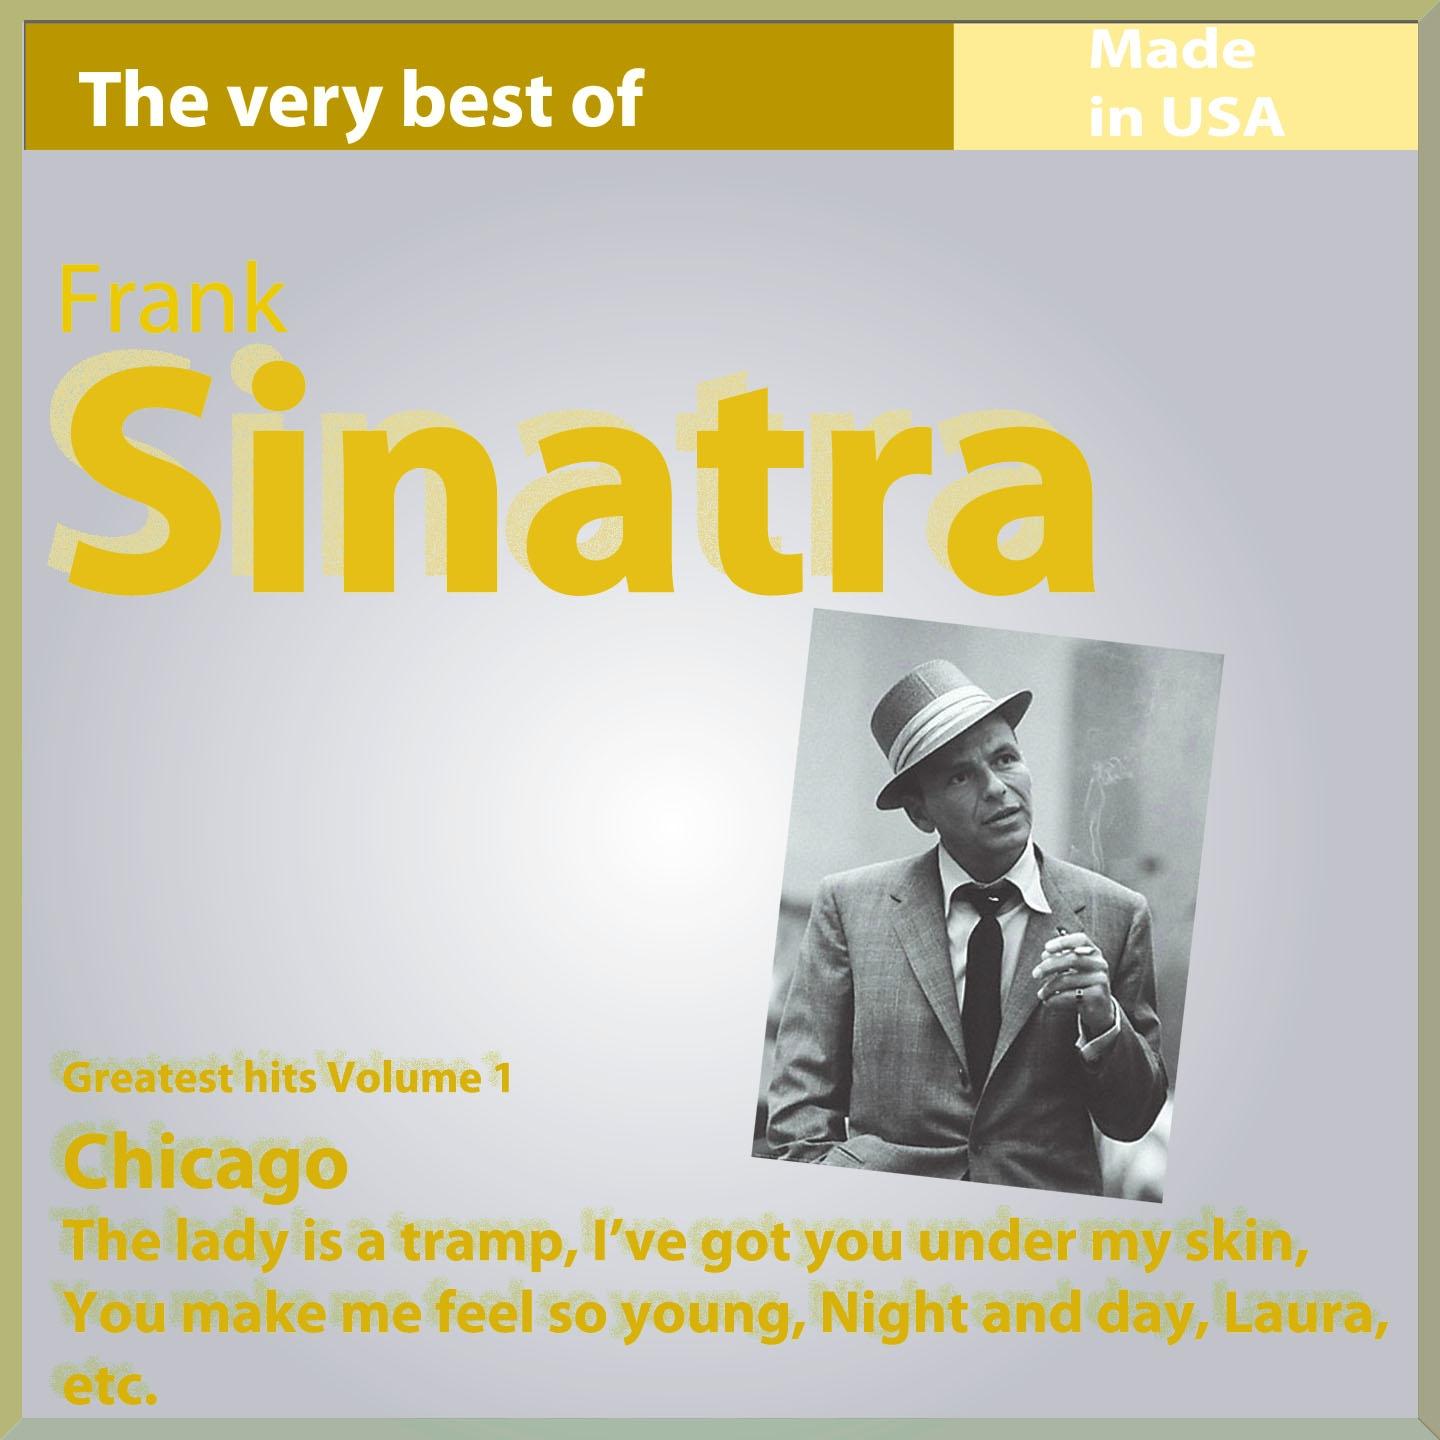 The Very Best of Frank Sinatra: Chicago